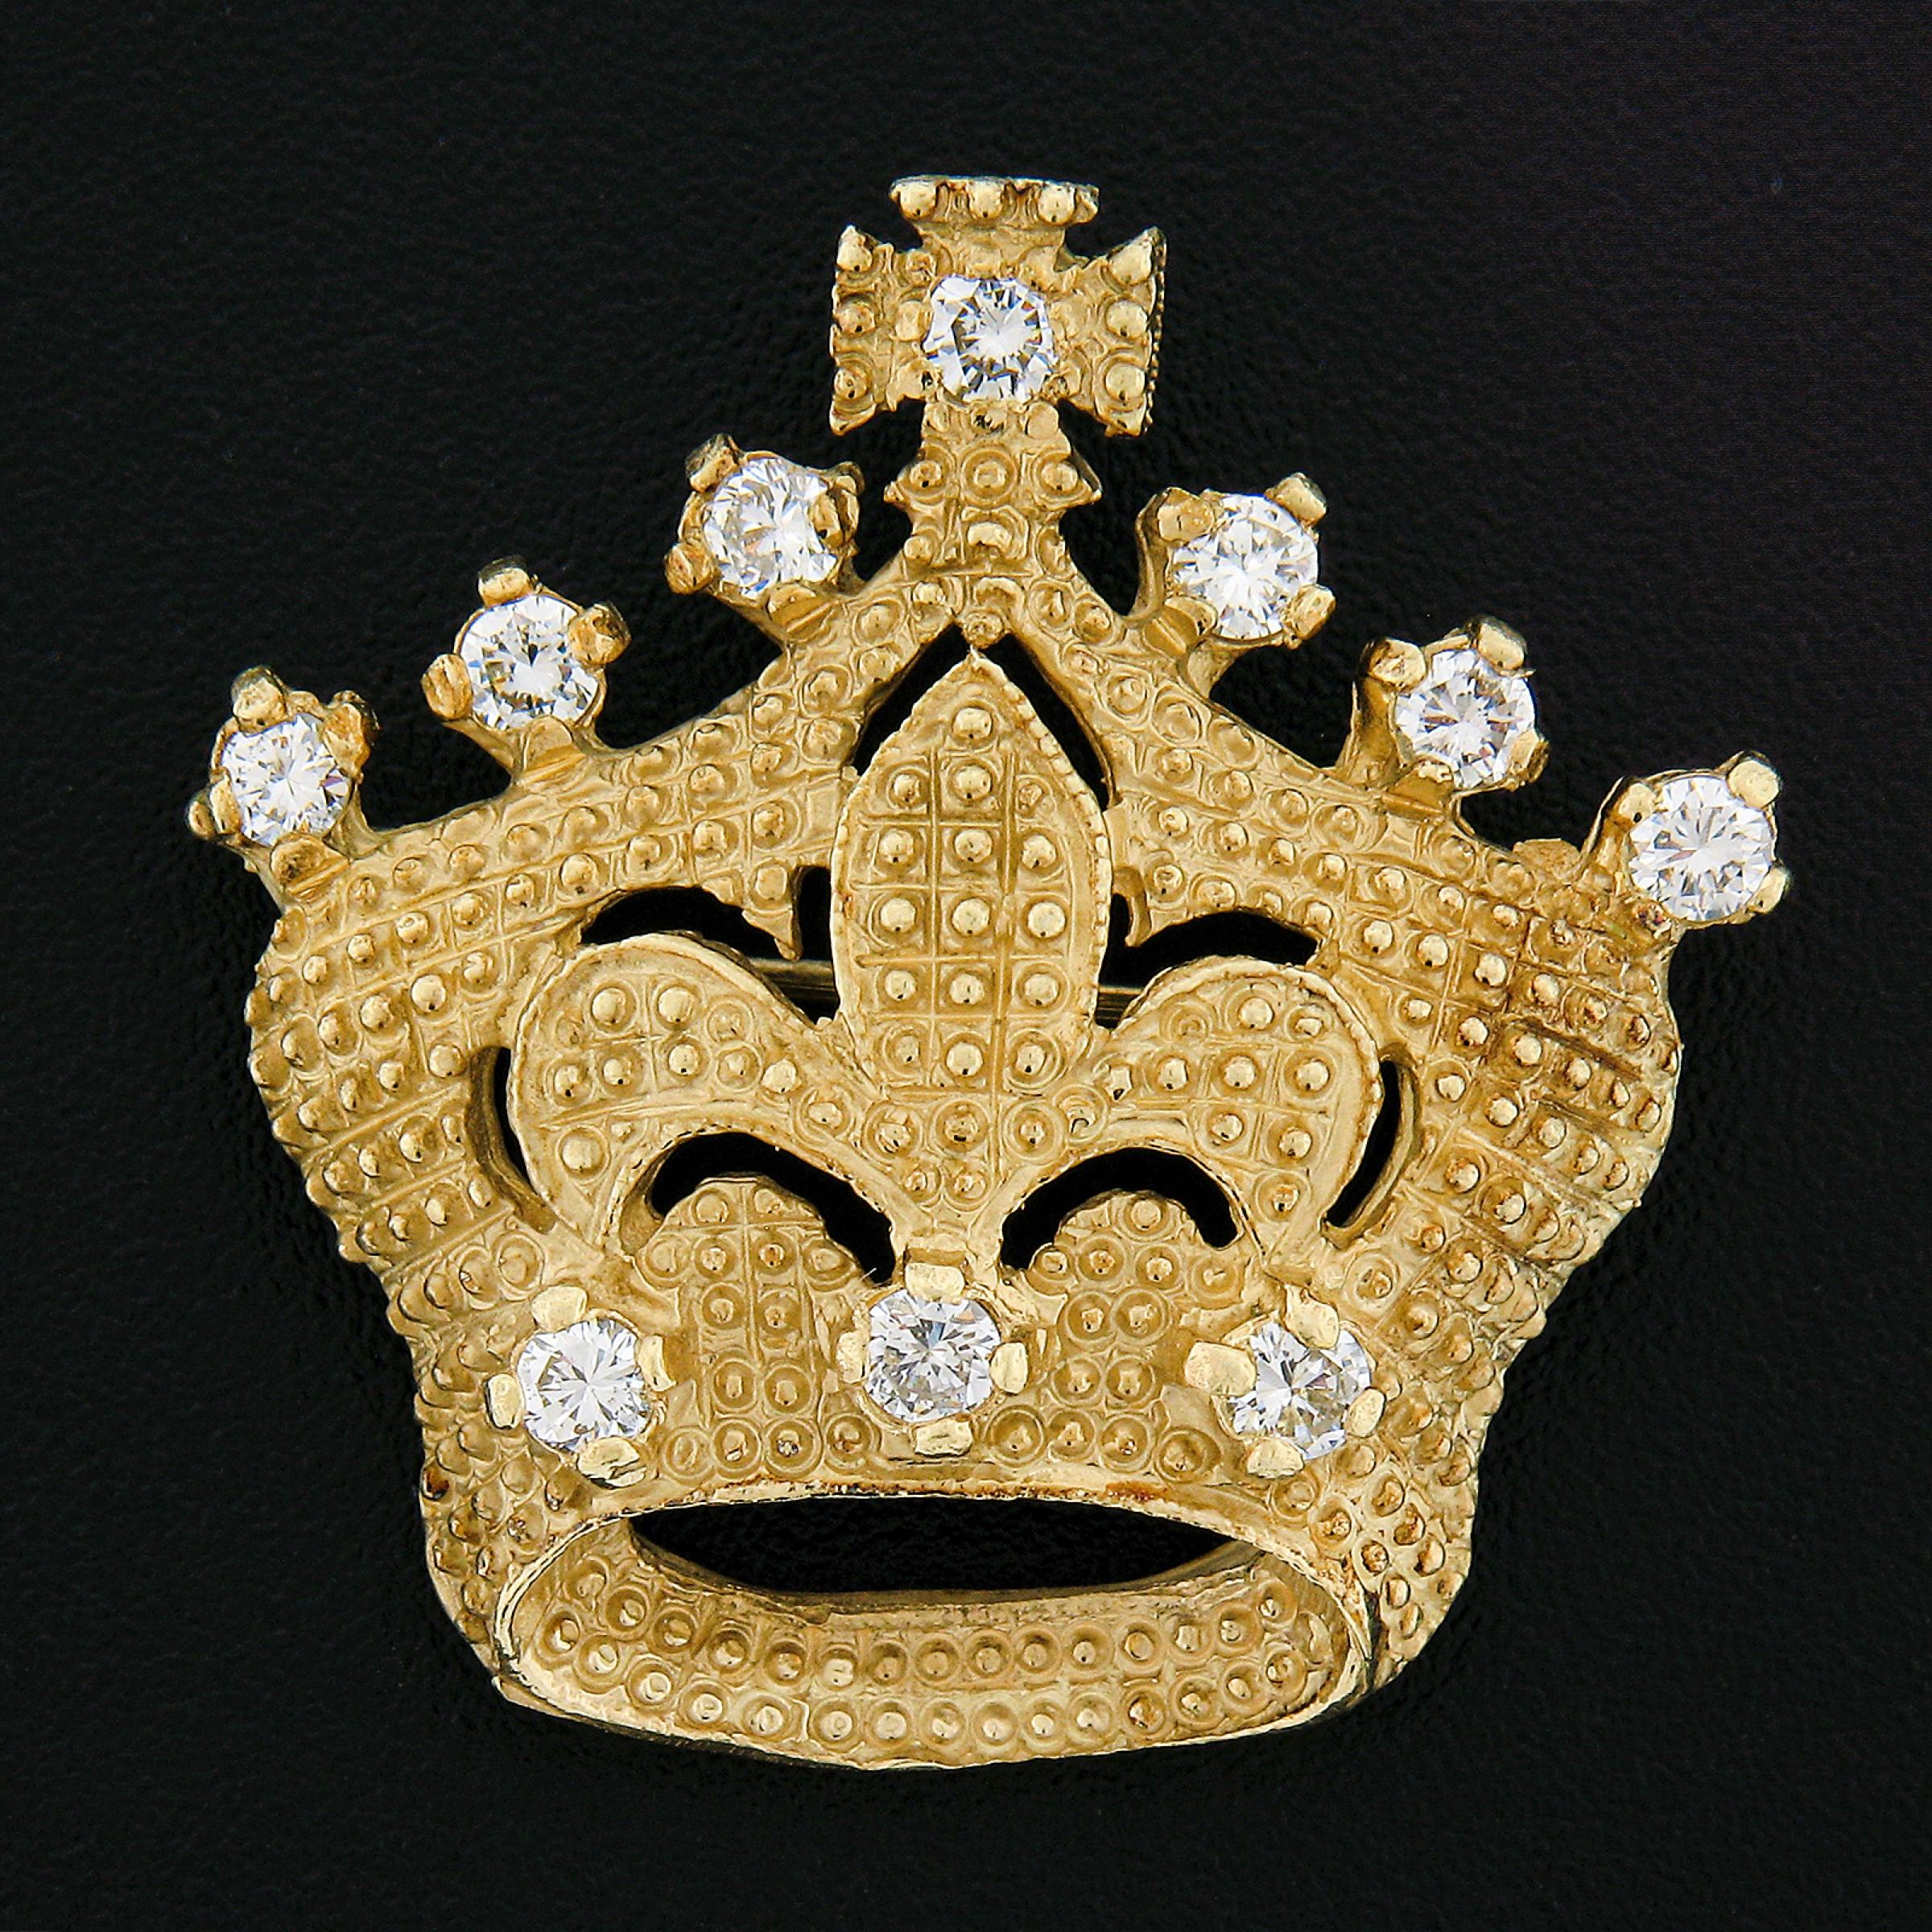 A well made pin/brooch which was crafted from solid 18k gold. The piece features a crown with Fleur De Lis design at the center and a cross at the top of the crown. The crown has a textured beaded finish adding a unique touch to this piece. The